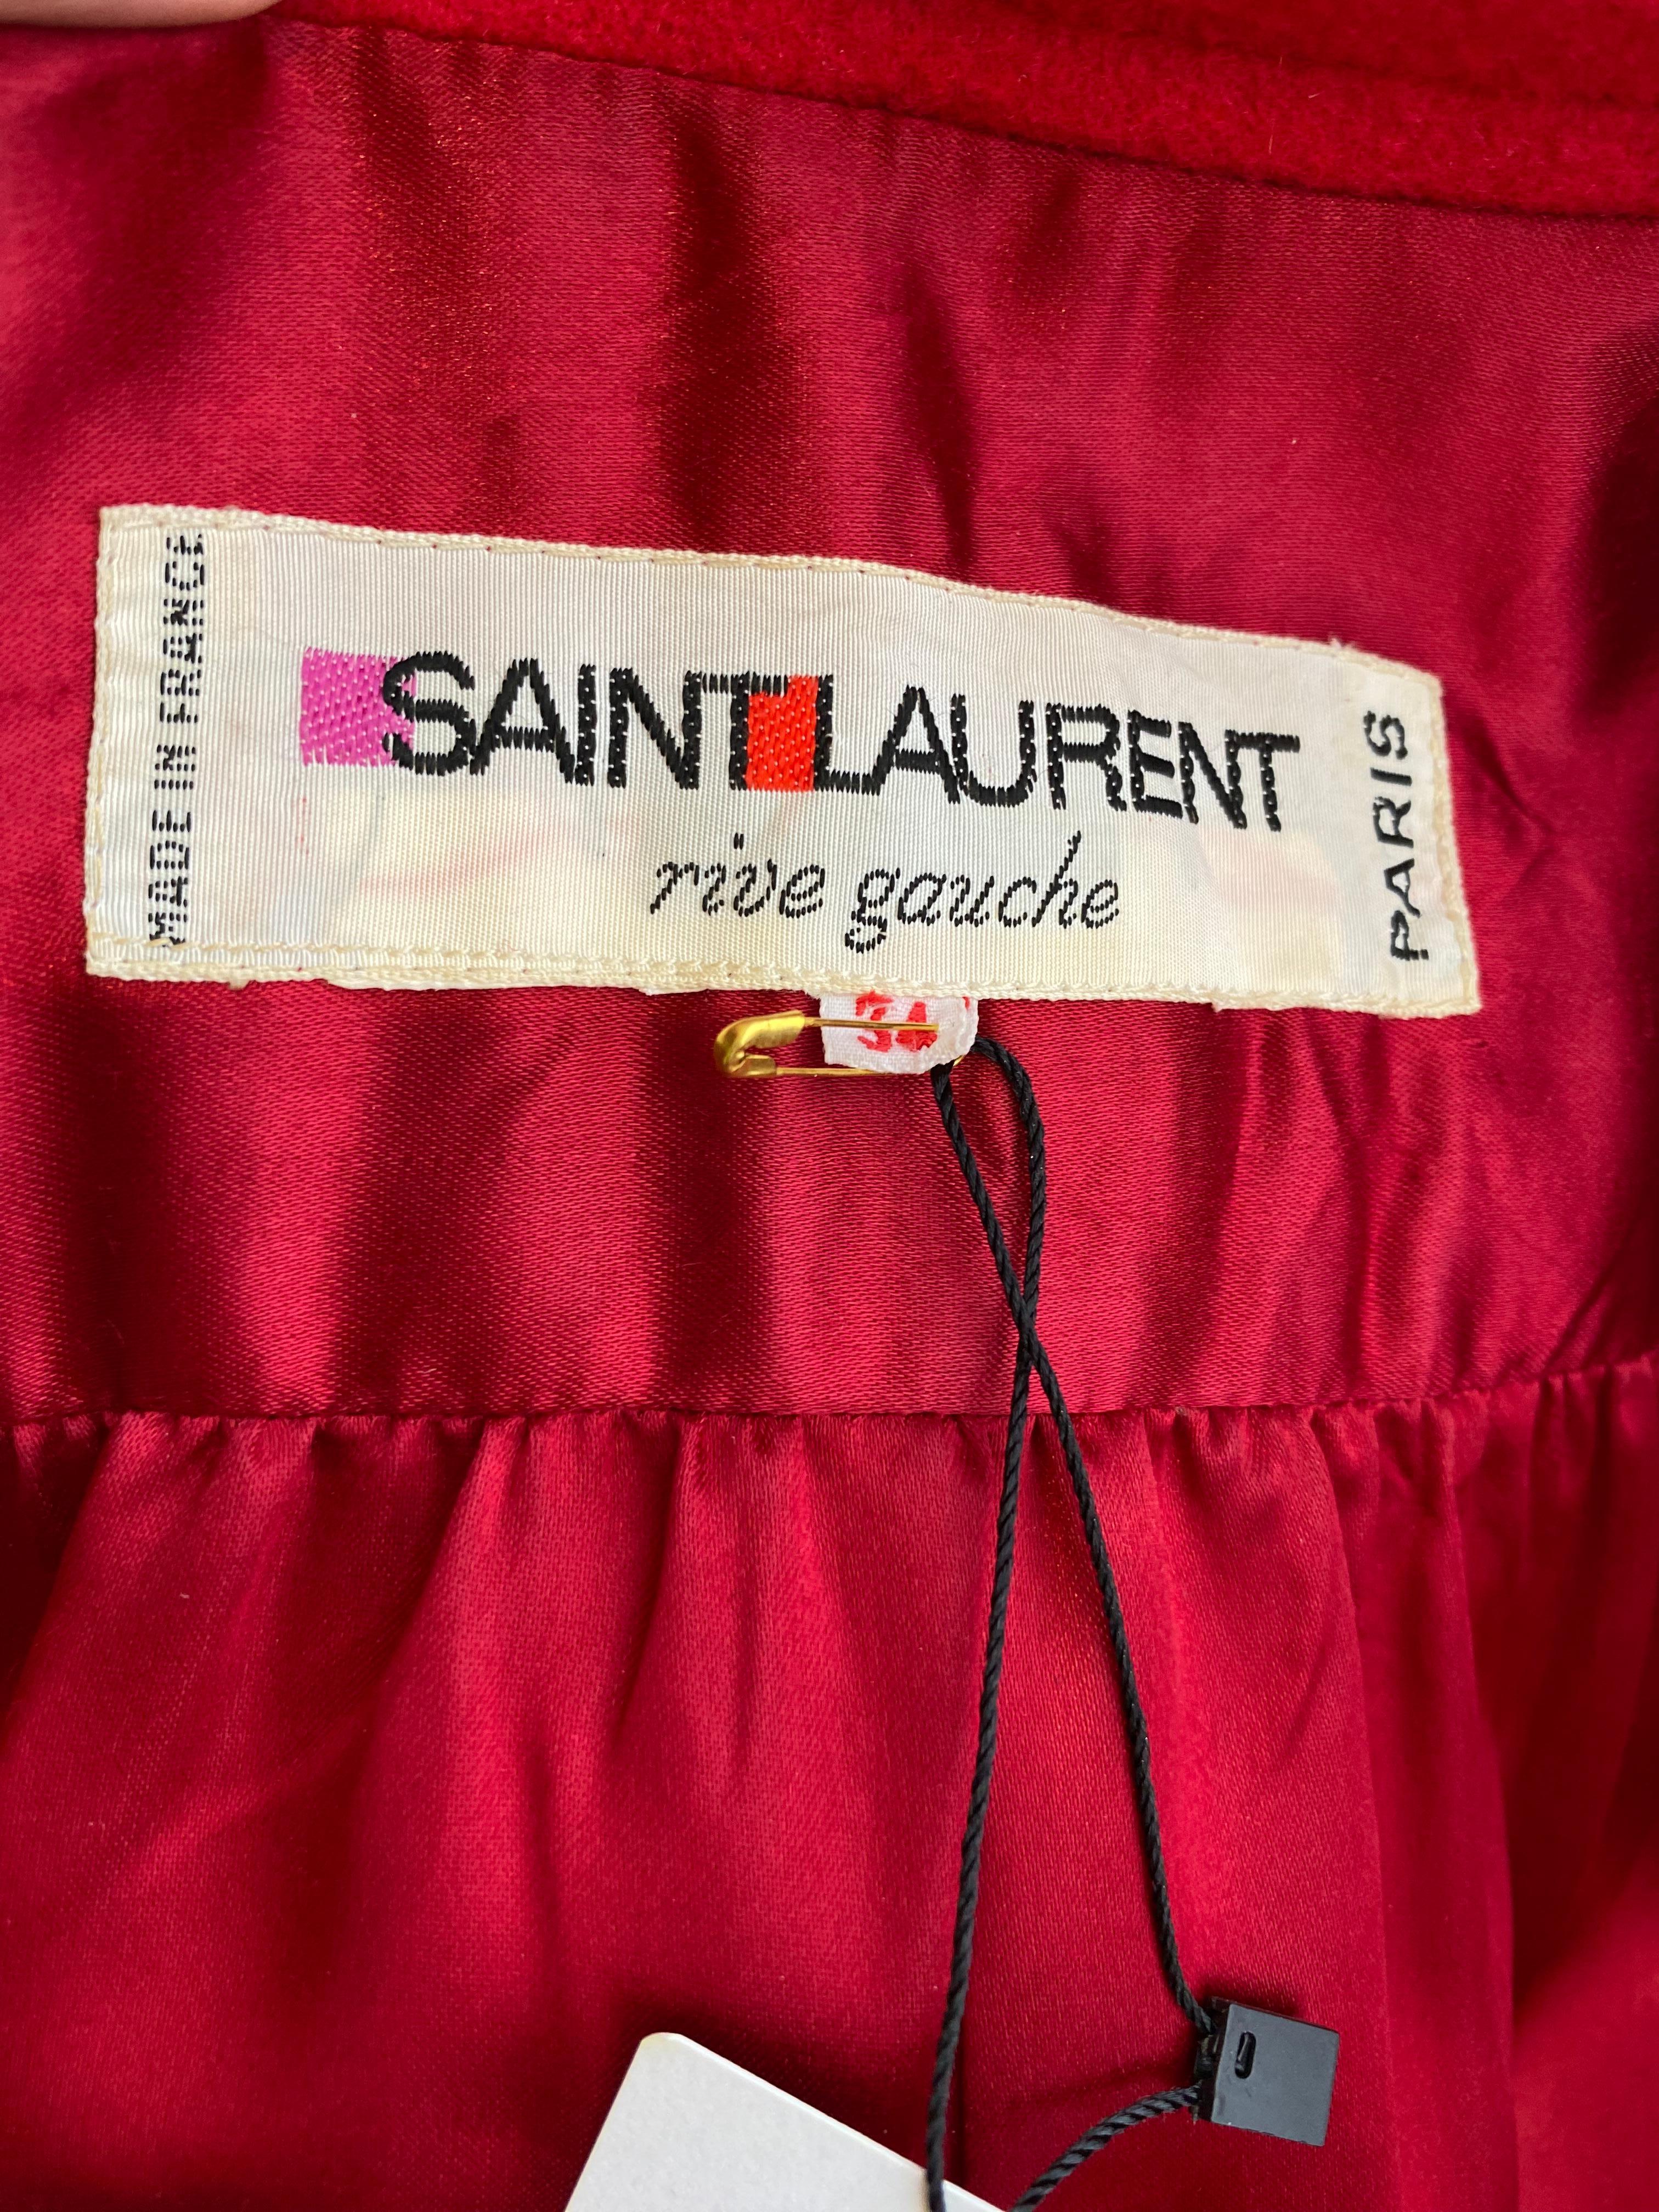 1980s Yves saint laurent red wool coat with belt. 
- mandarin collar
- pockets
- belt
lined in silk
Size 8/ Medium / Marked size 34Fr
Bust 40”

** flaws ( see image ) attached lining need to be re stitch and tiny holes on the fabric